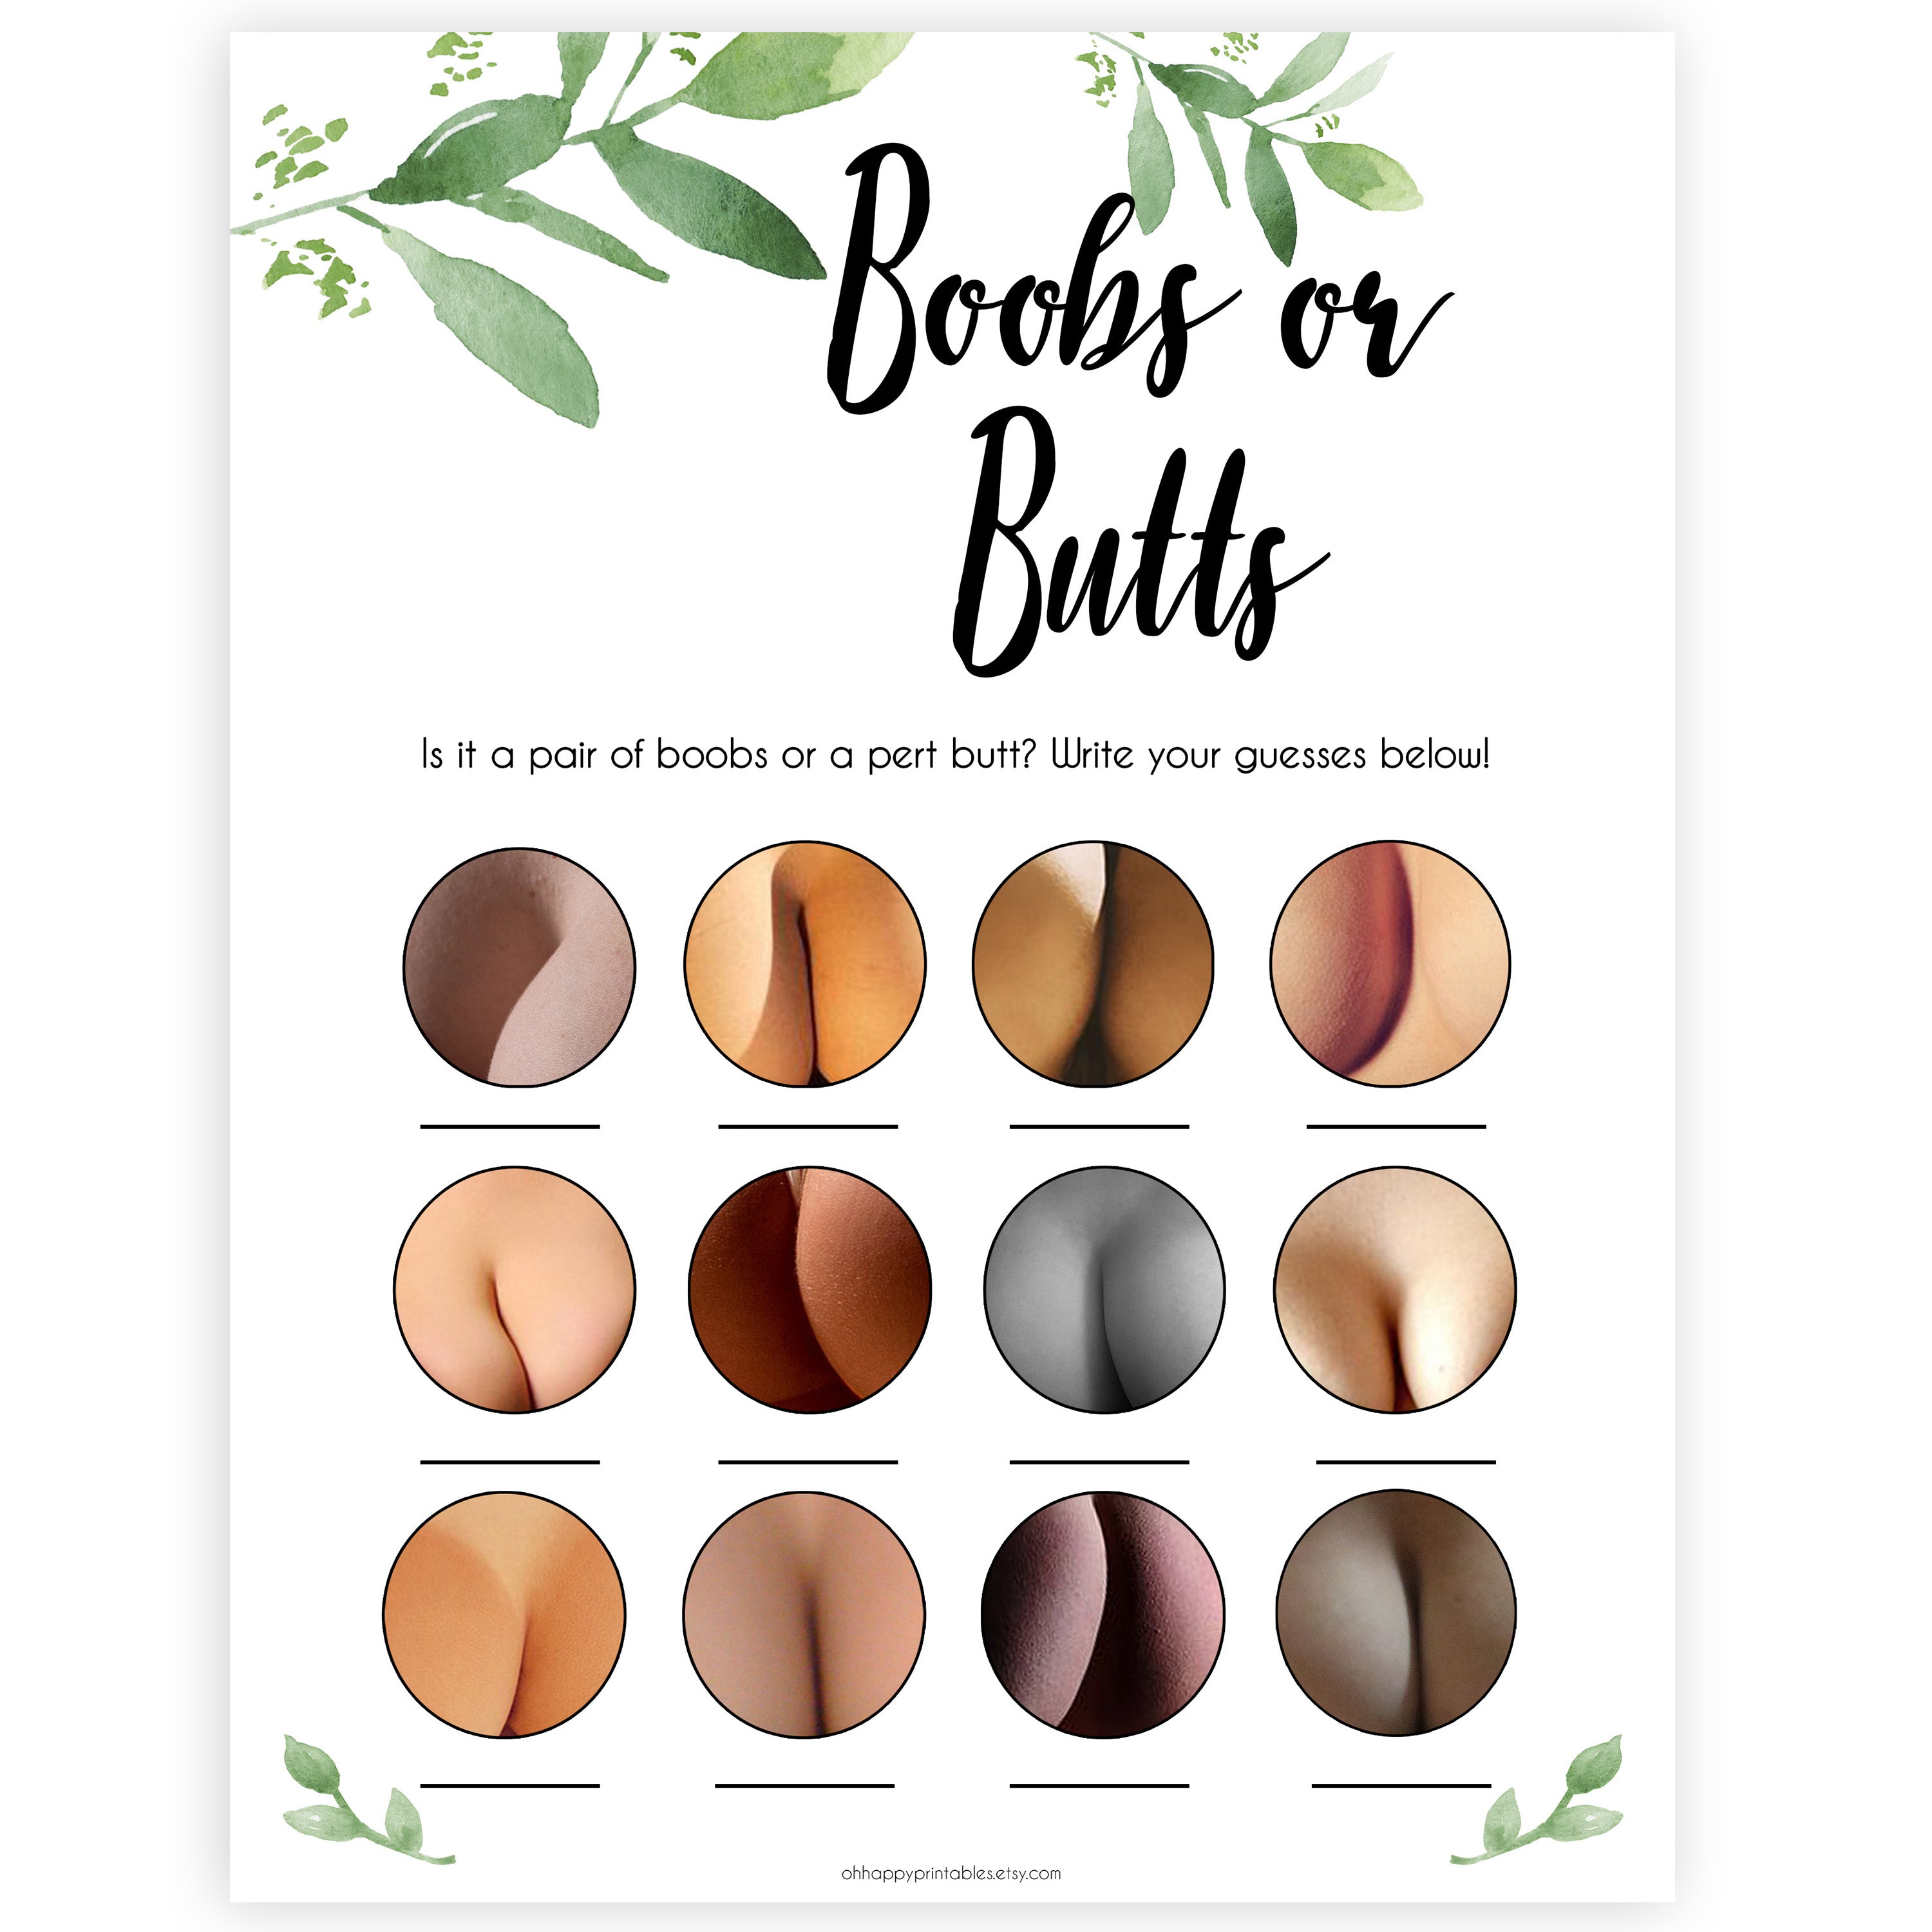 botanical boobs or butts baby shower games, floral printable baby shower games, fun baby shower games, popular baby shower games